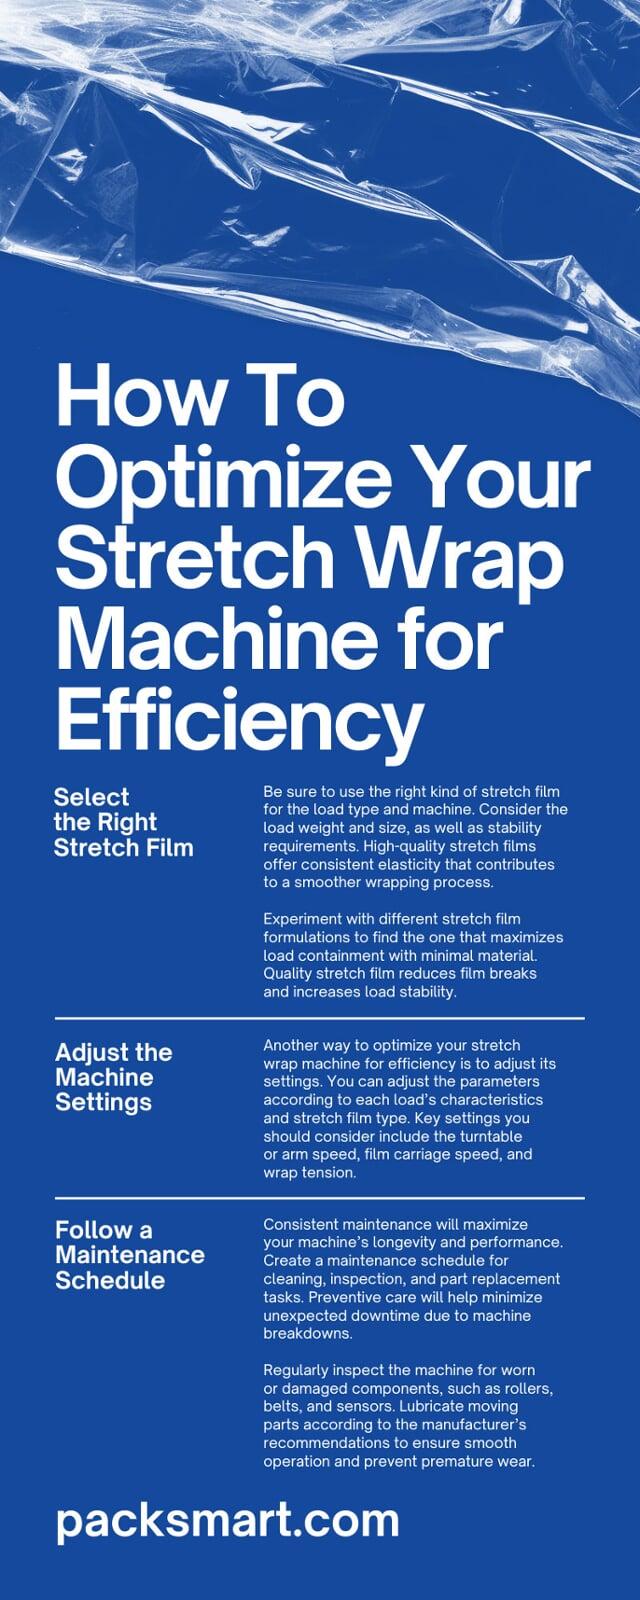 How To Optimize Your Stretch Wrap Machine for Efficiency